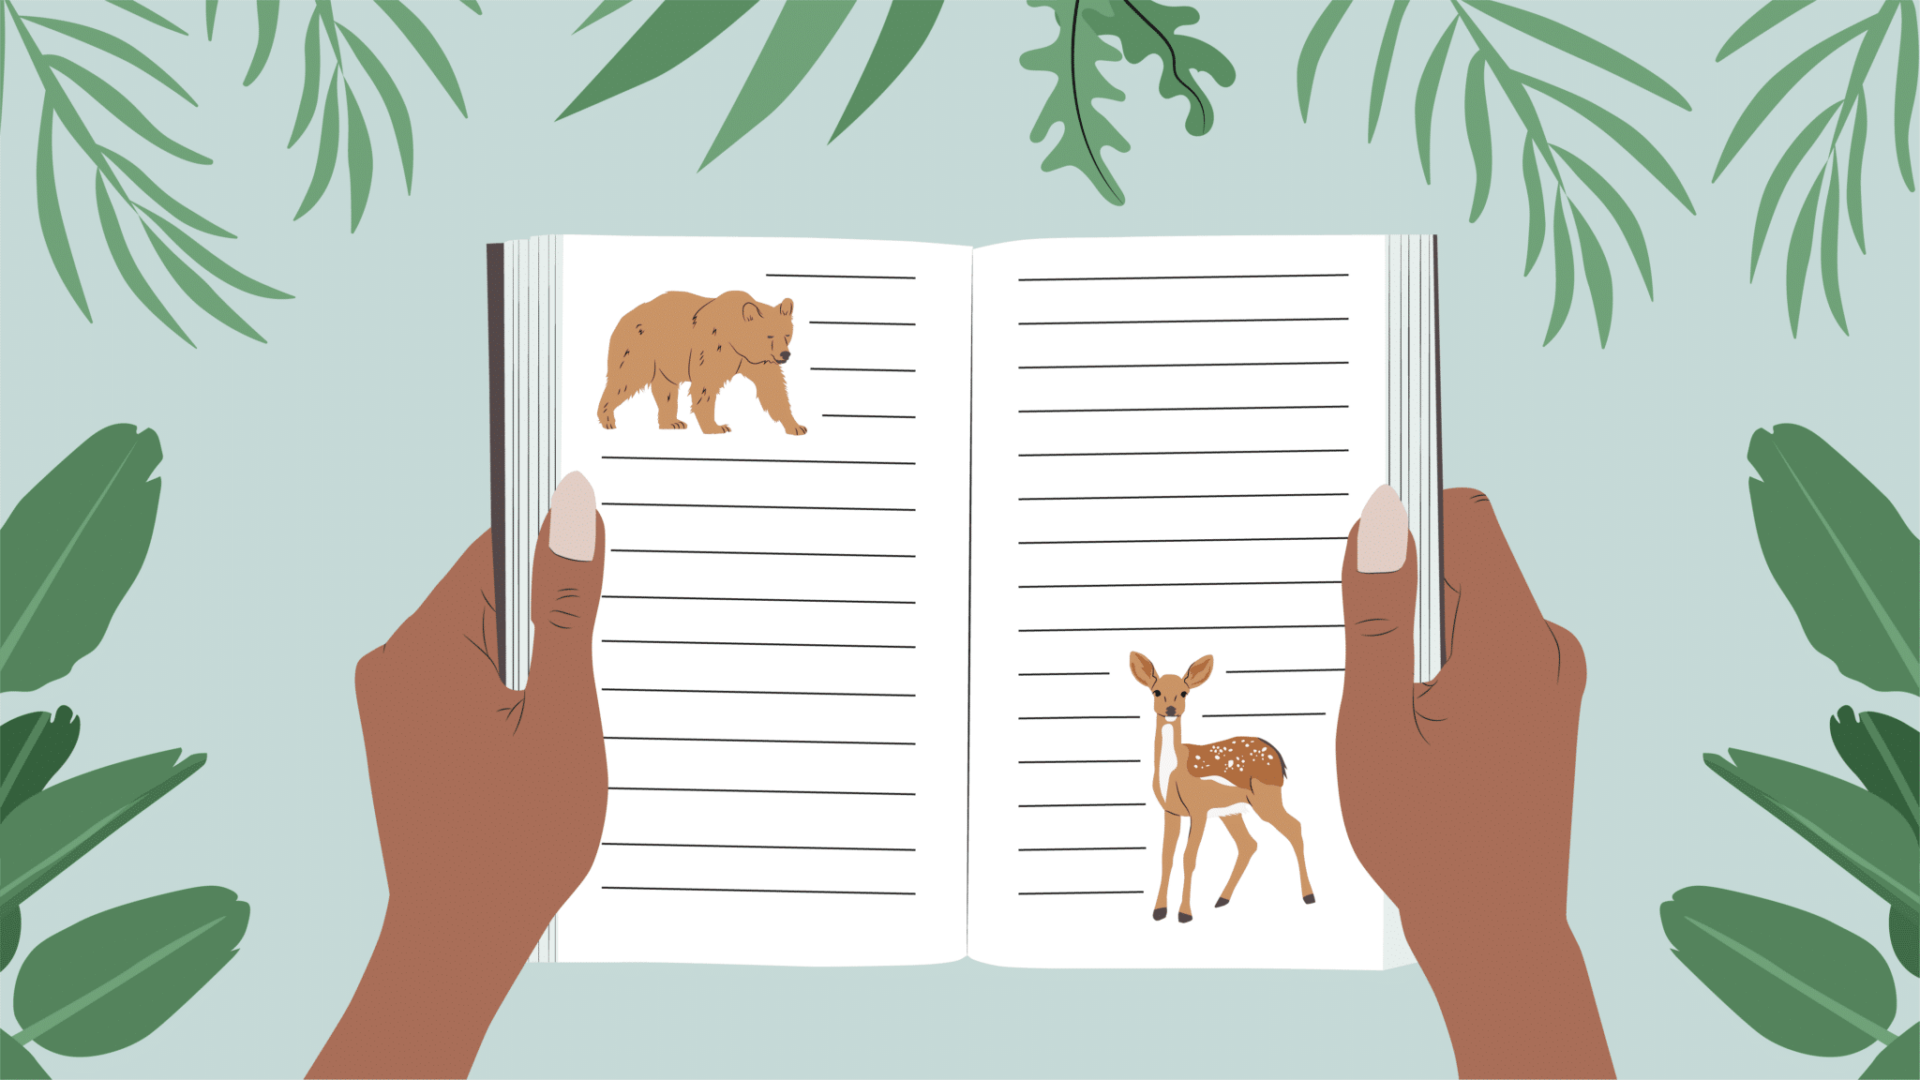 Illustration of green plants and hands opening a book featuring a deer and brown bear.